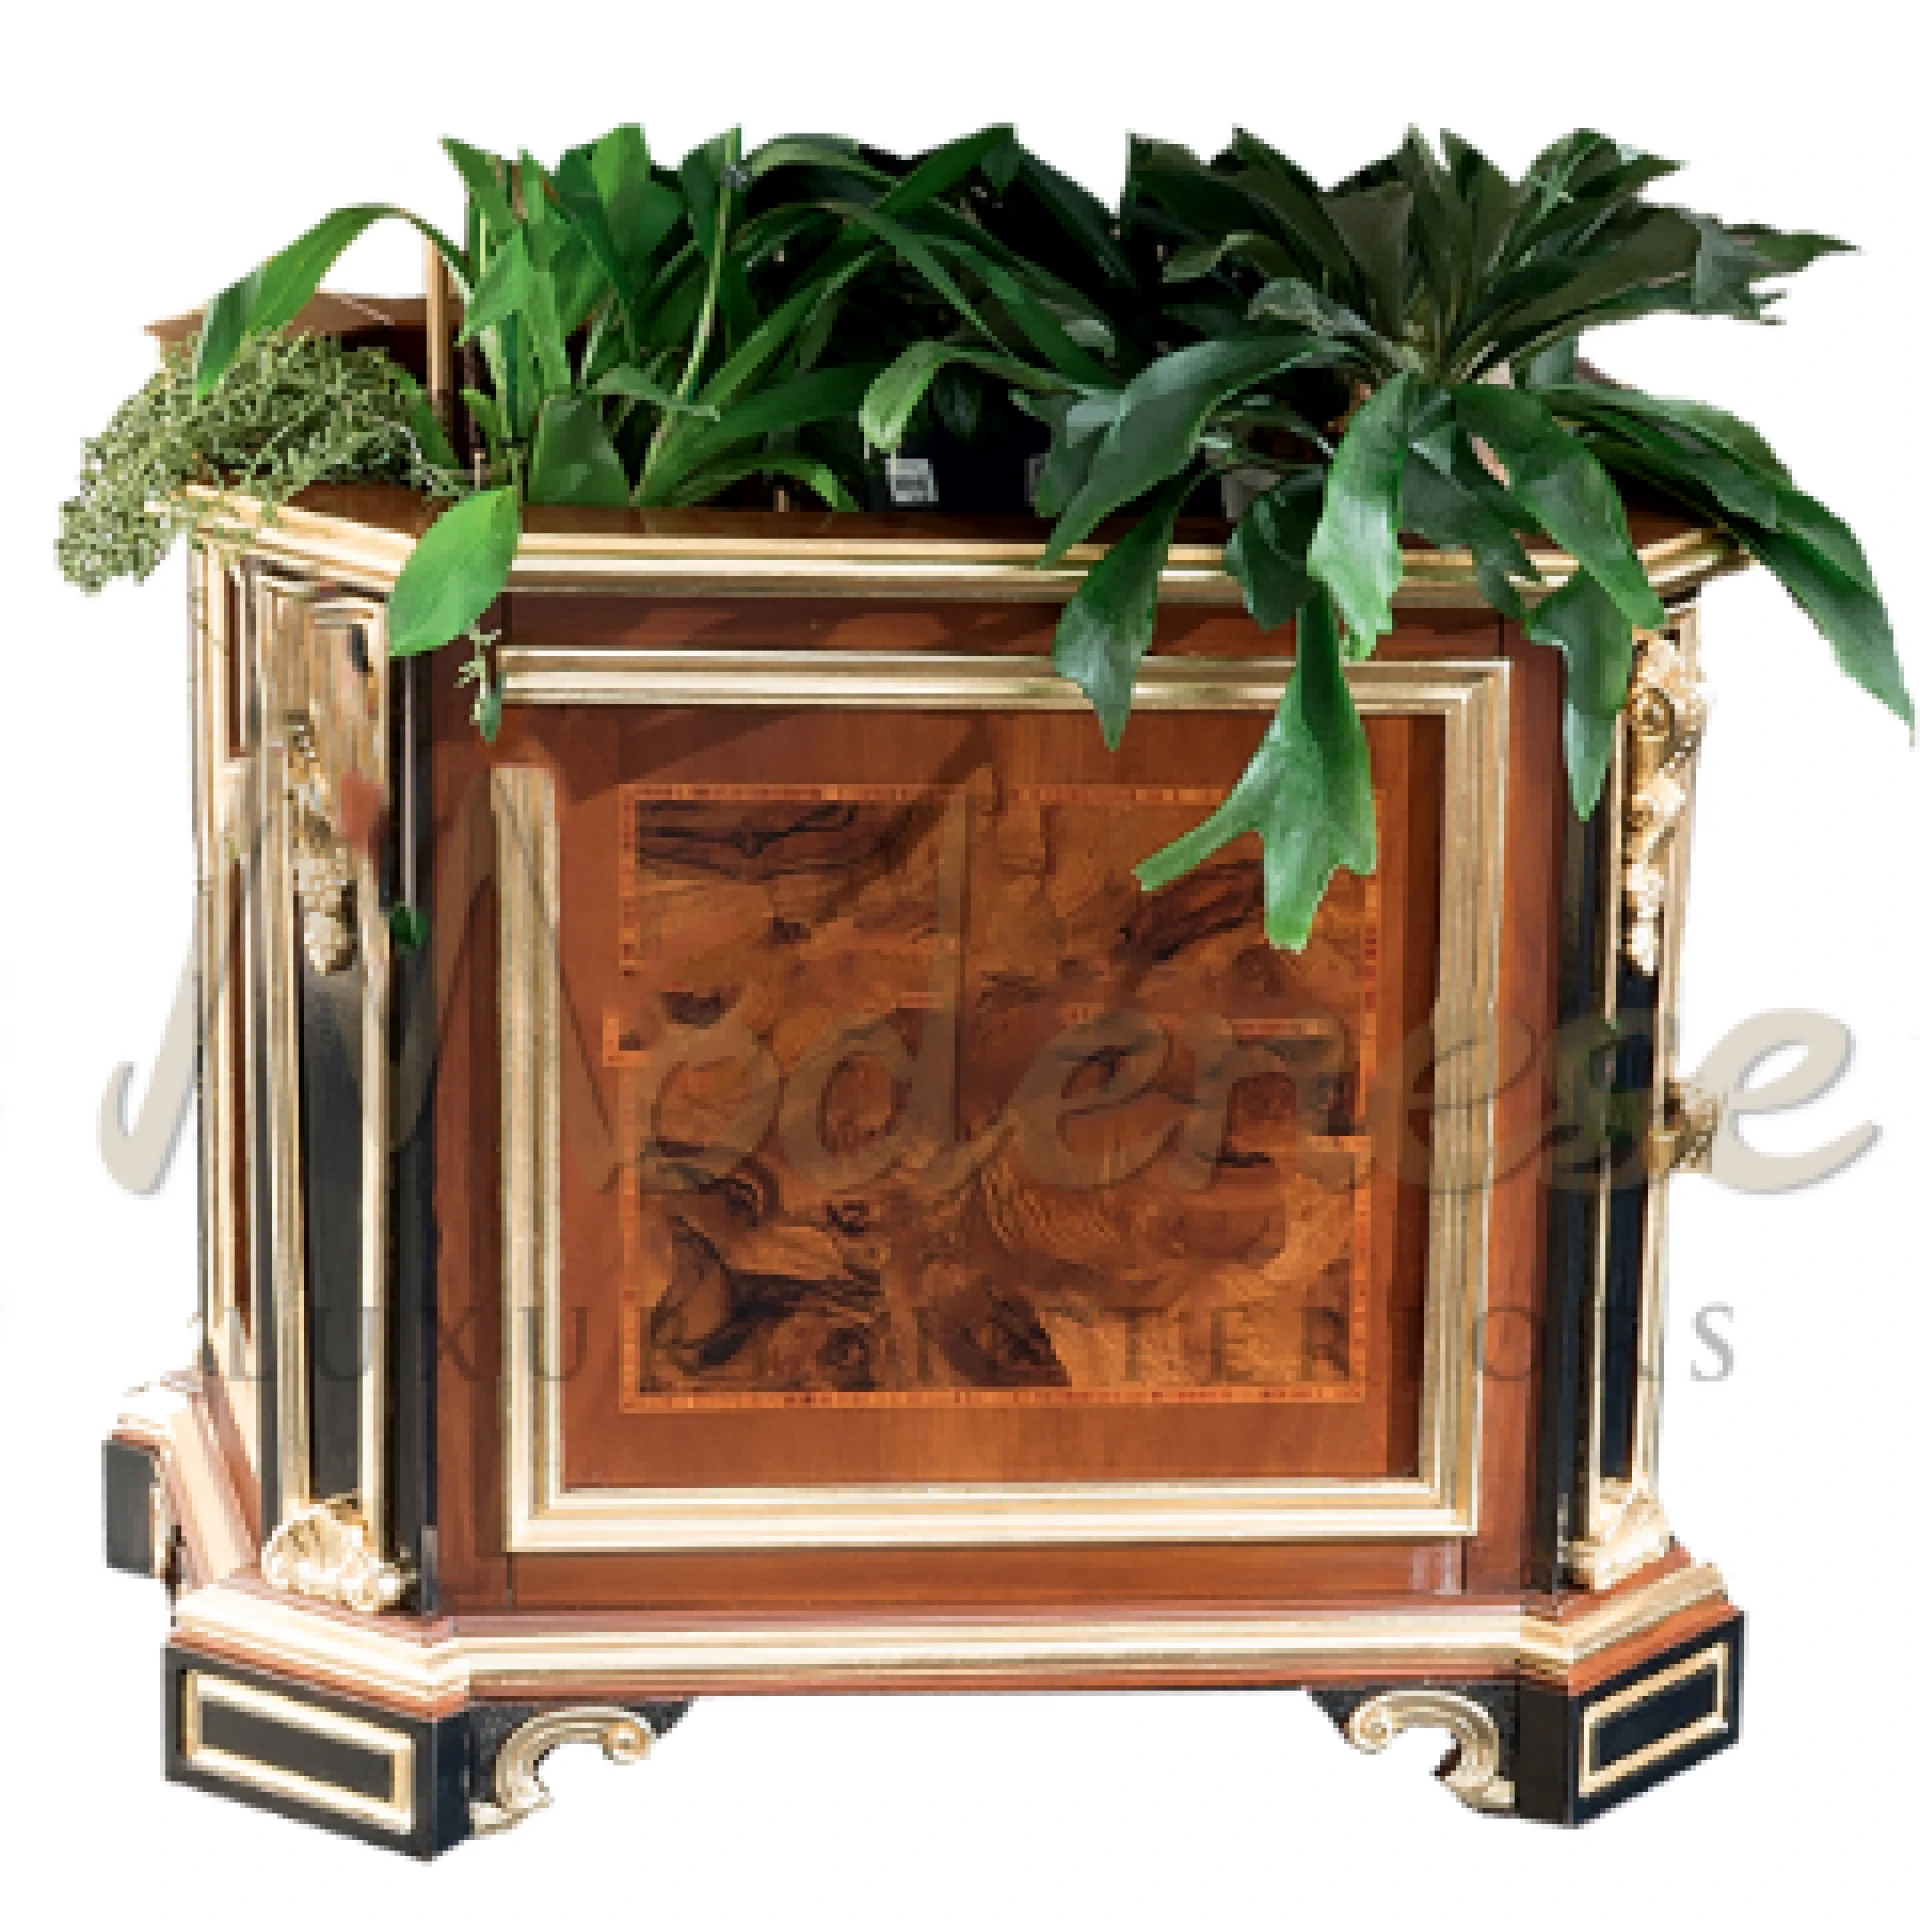 Elegant Solid Wood Flowerpot, crafted from high-quality materials like pine and cedar, for luxury interiors.